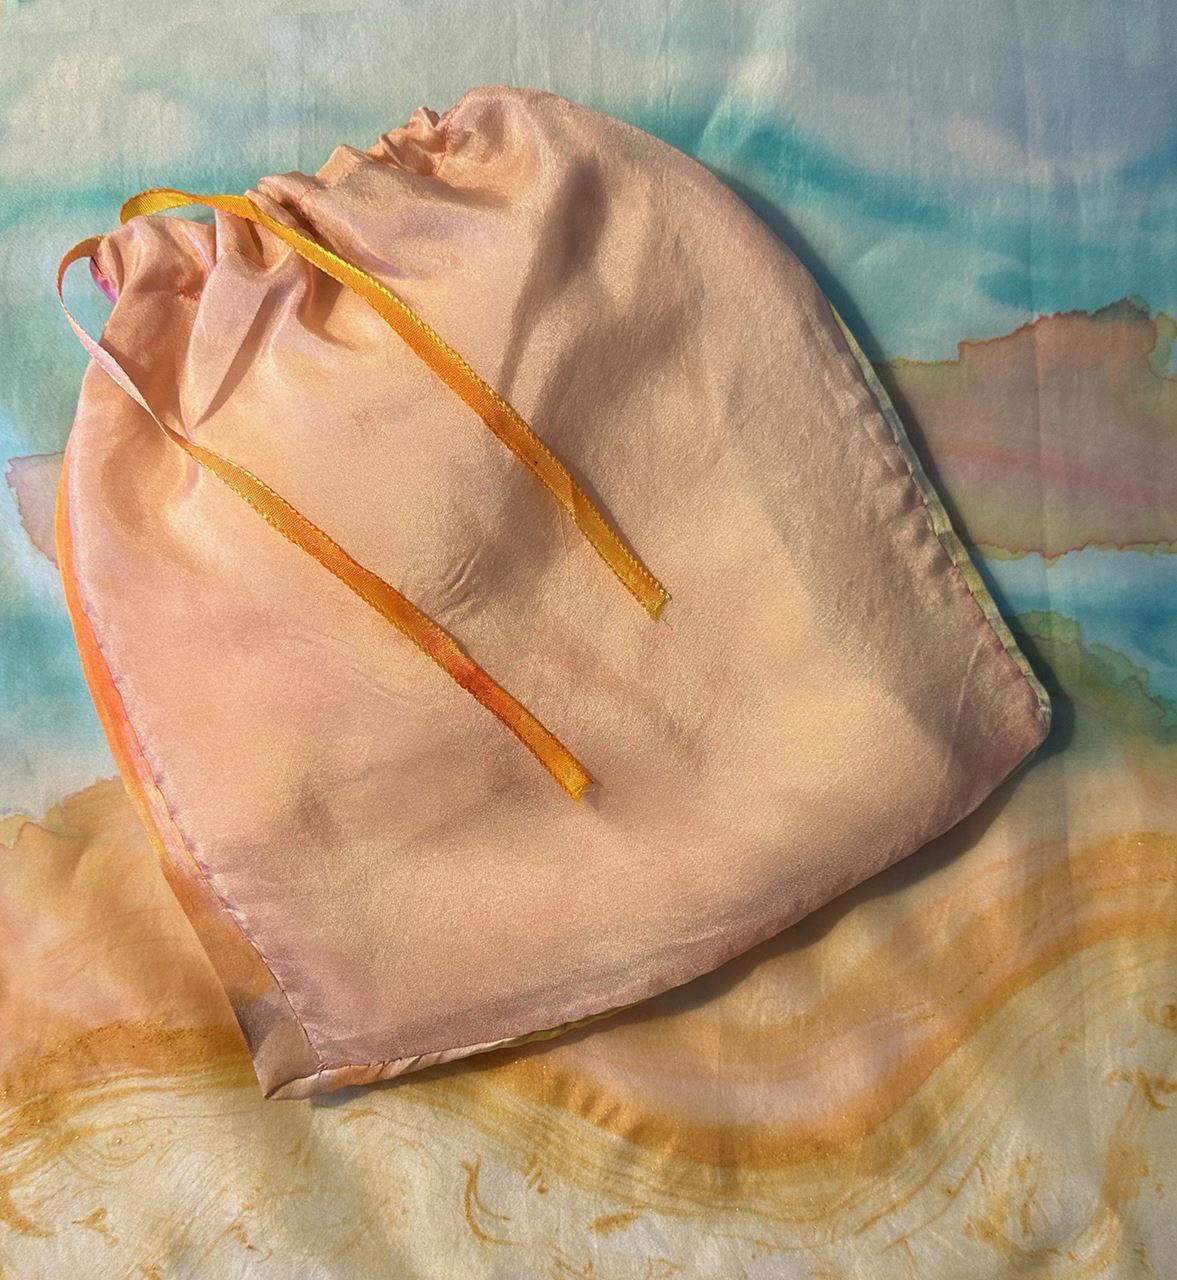 Painting a Silk Bag - wet on wet process